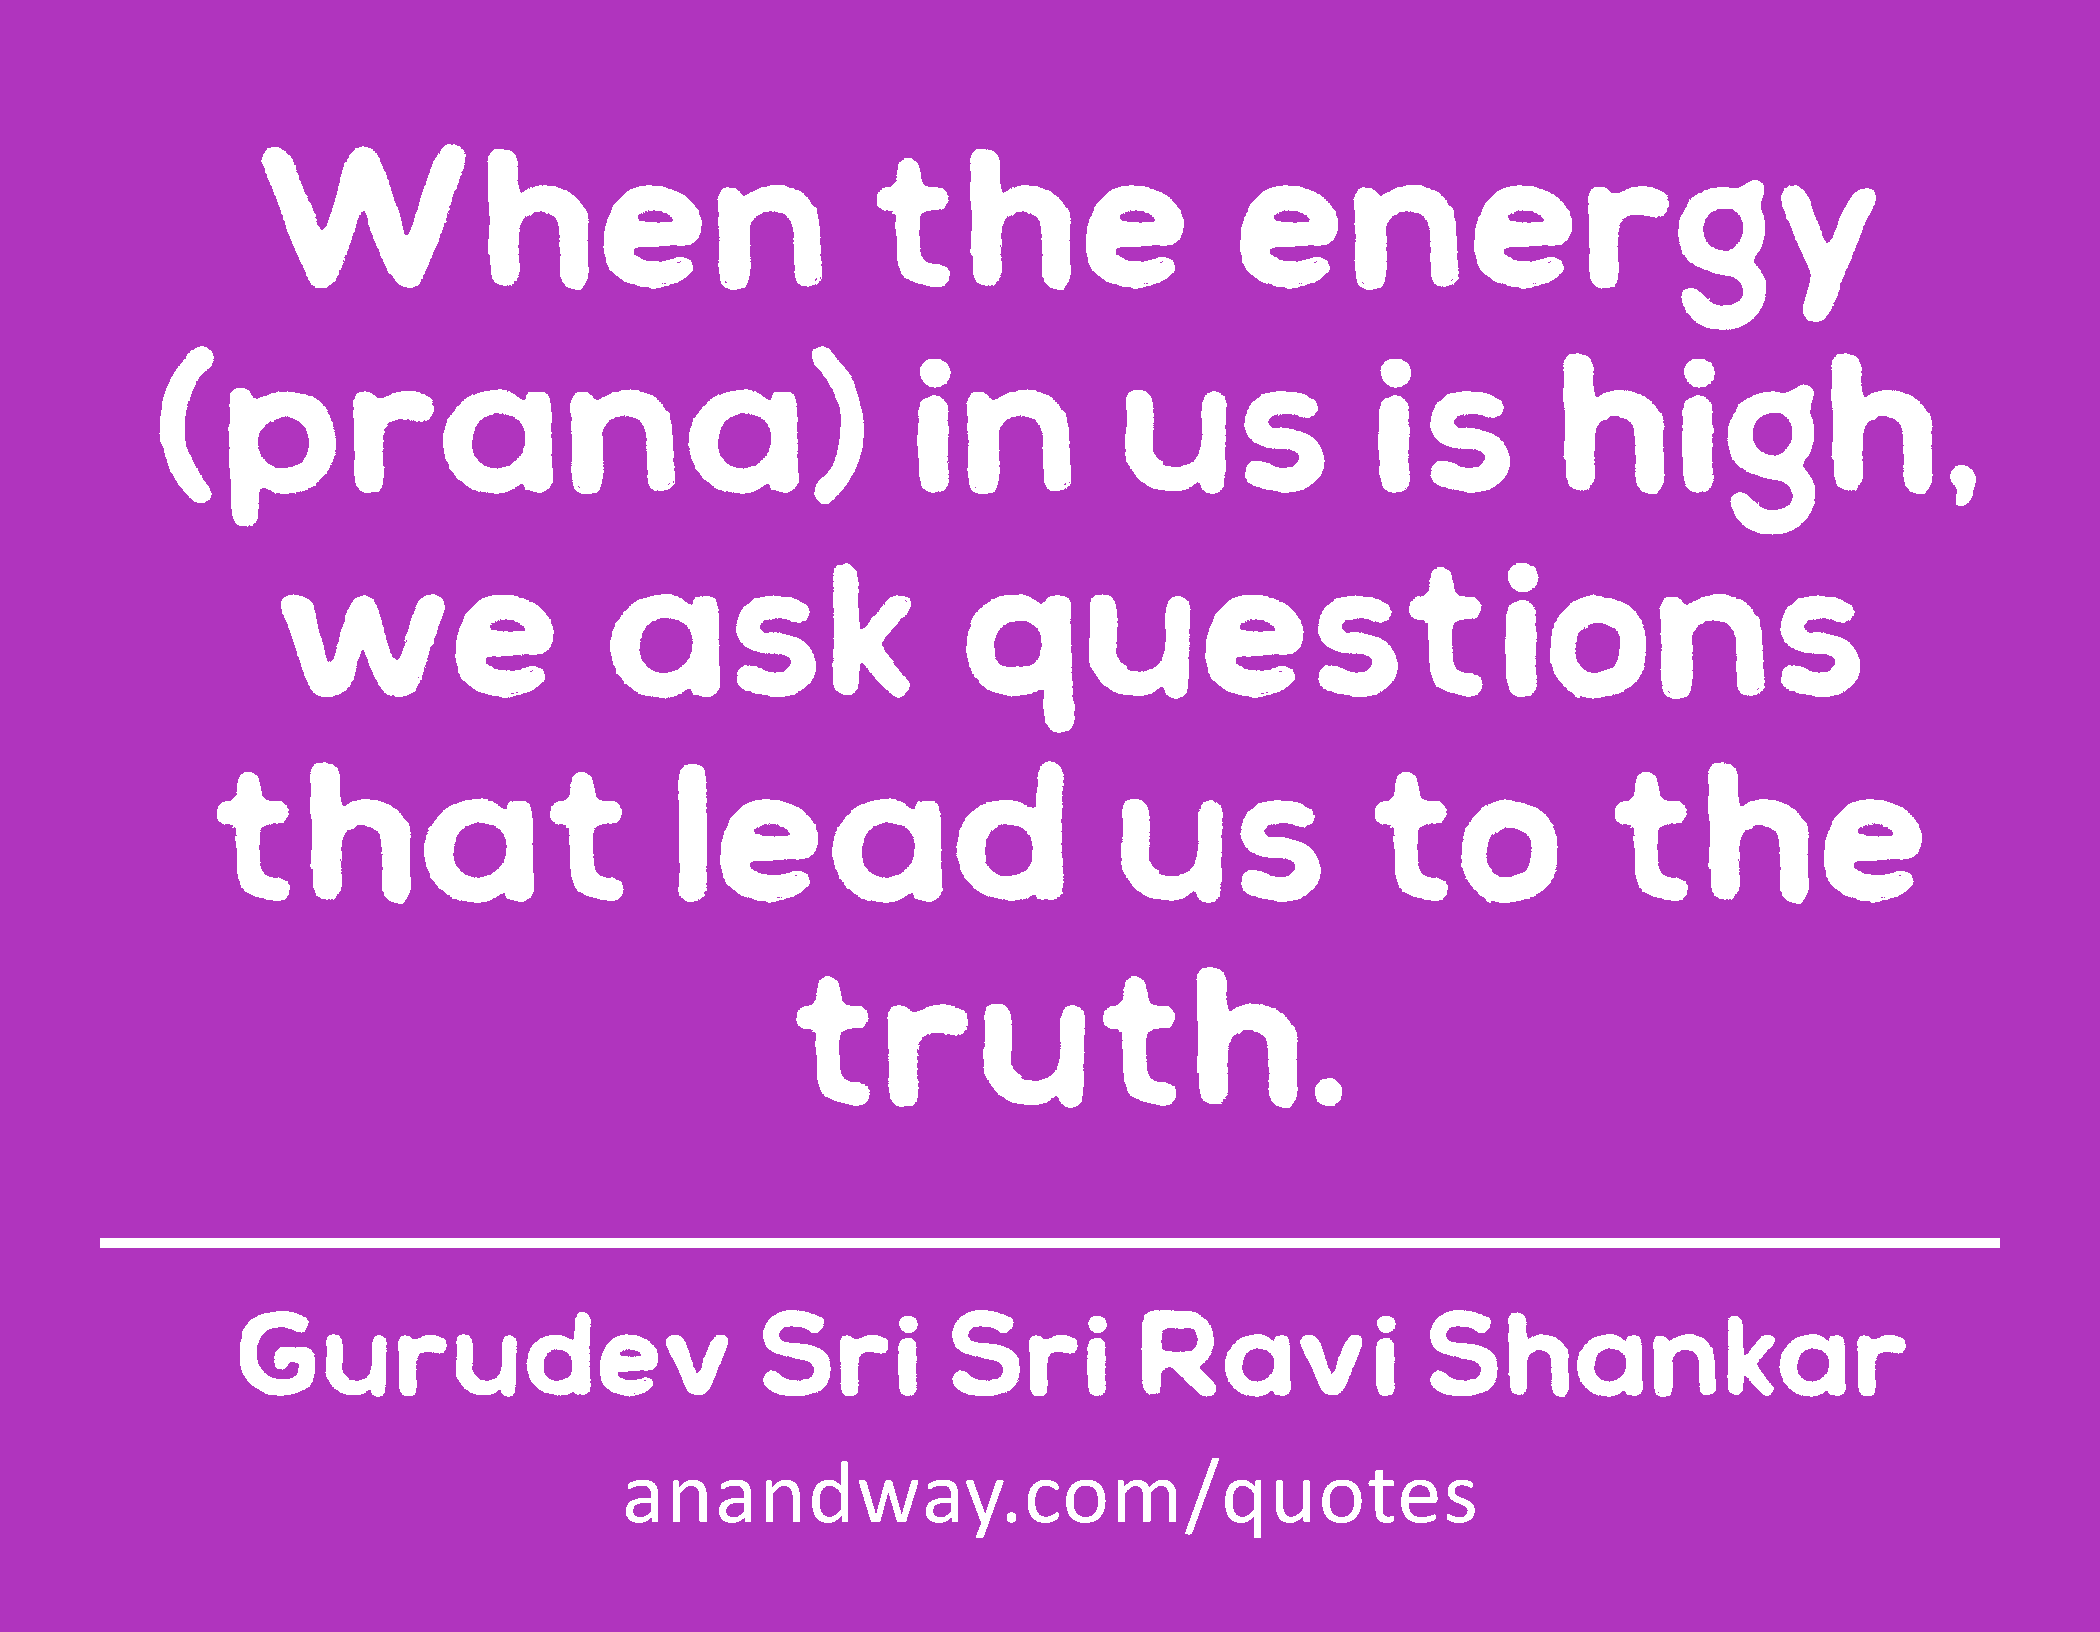 When the energy (prana) in us is high, we ask questions that lead us to the truth. 
 -Gurudev Sri Sri Ravi Shankar